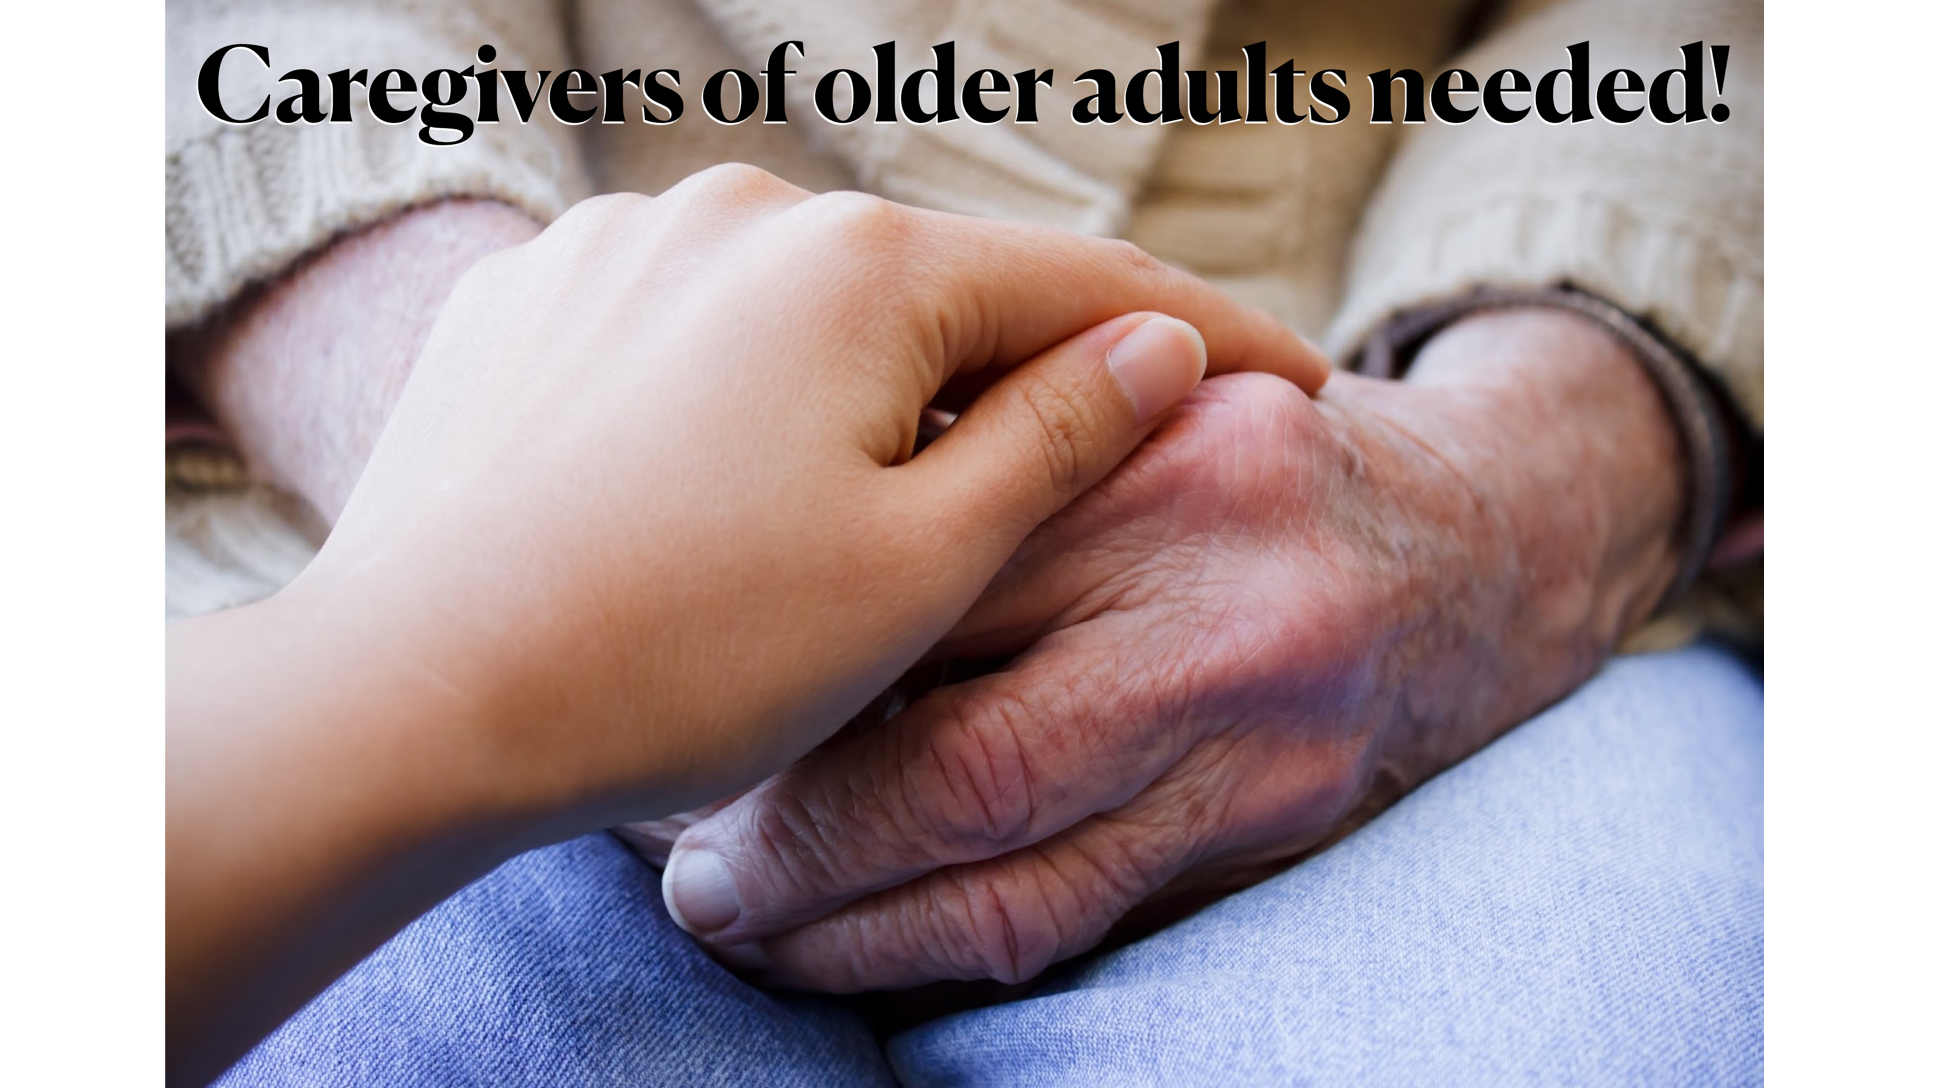 Recruiting caregivers of older adult(s)!